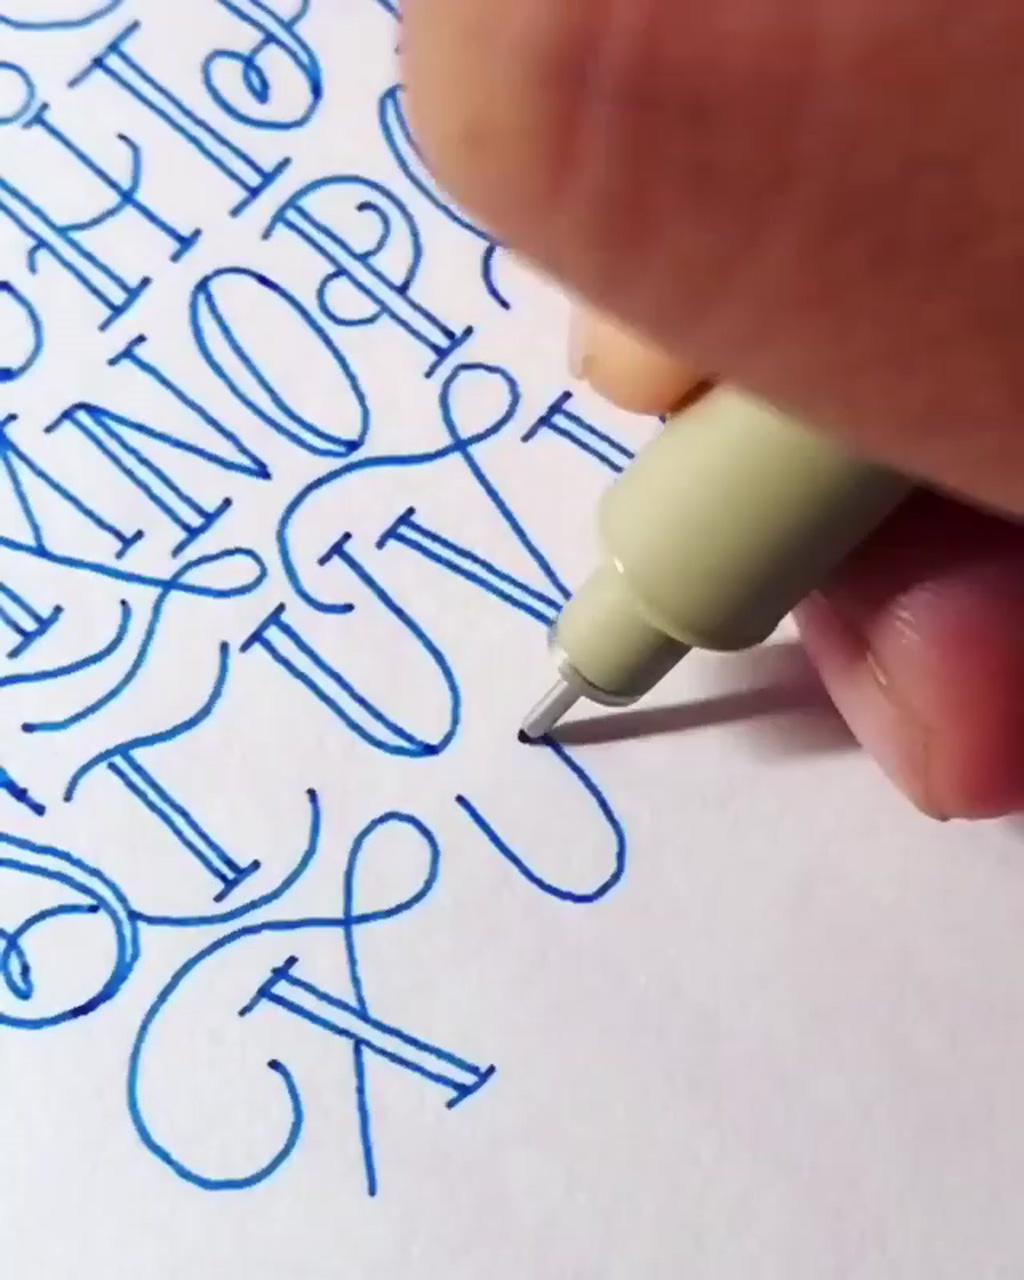 Calligraphy; learn hand lettering